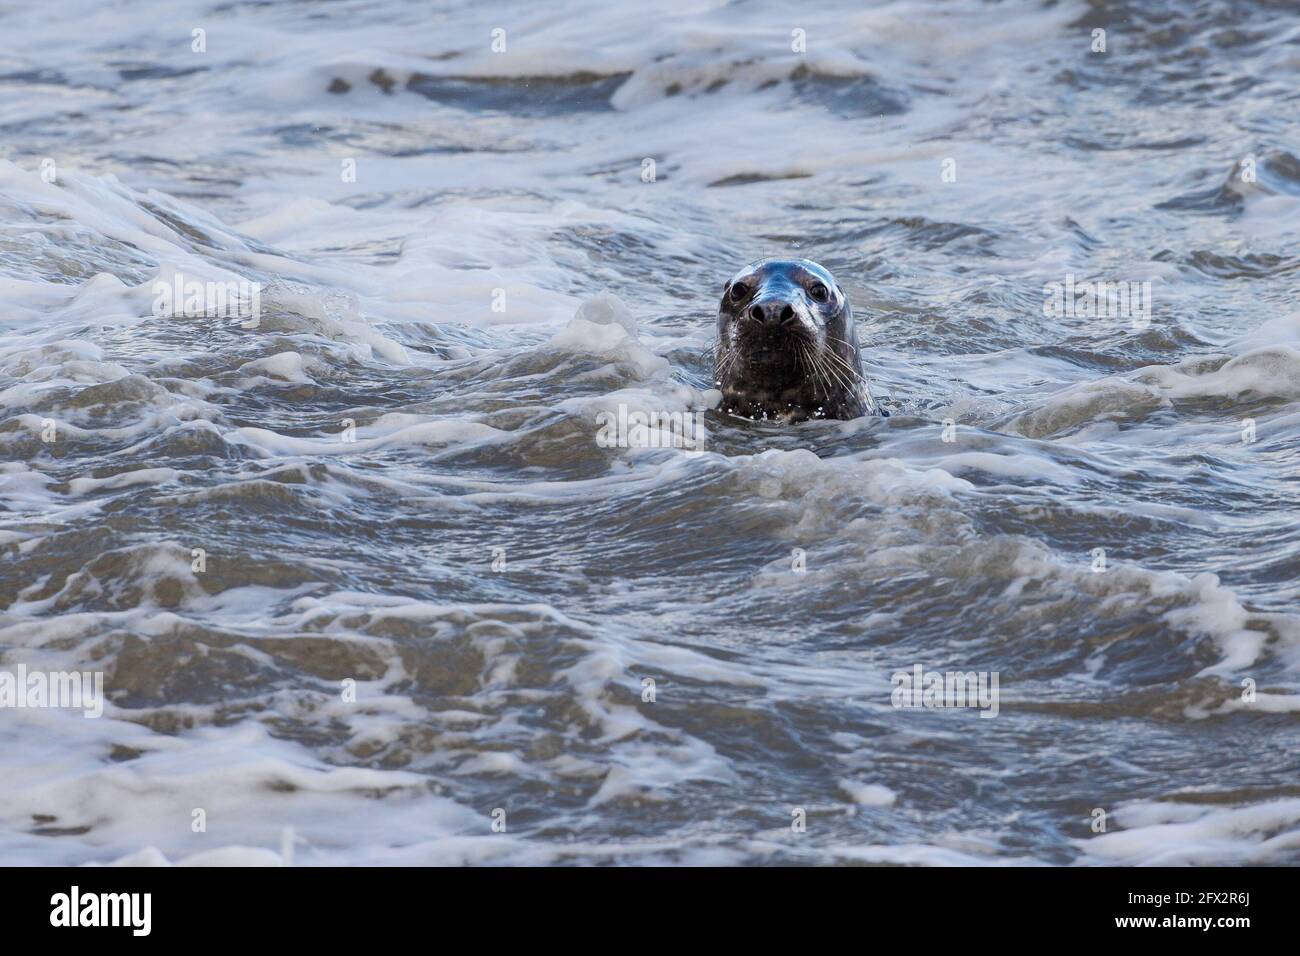 Single Grey Seal  Halichoerus grypus surfaces close to the shore in choppy water of the Irish Sea Stock Photo